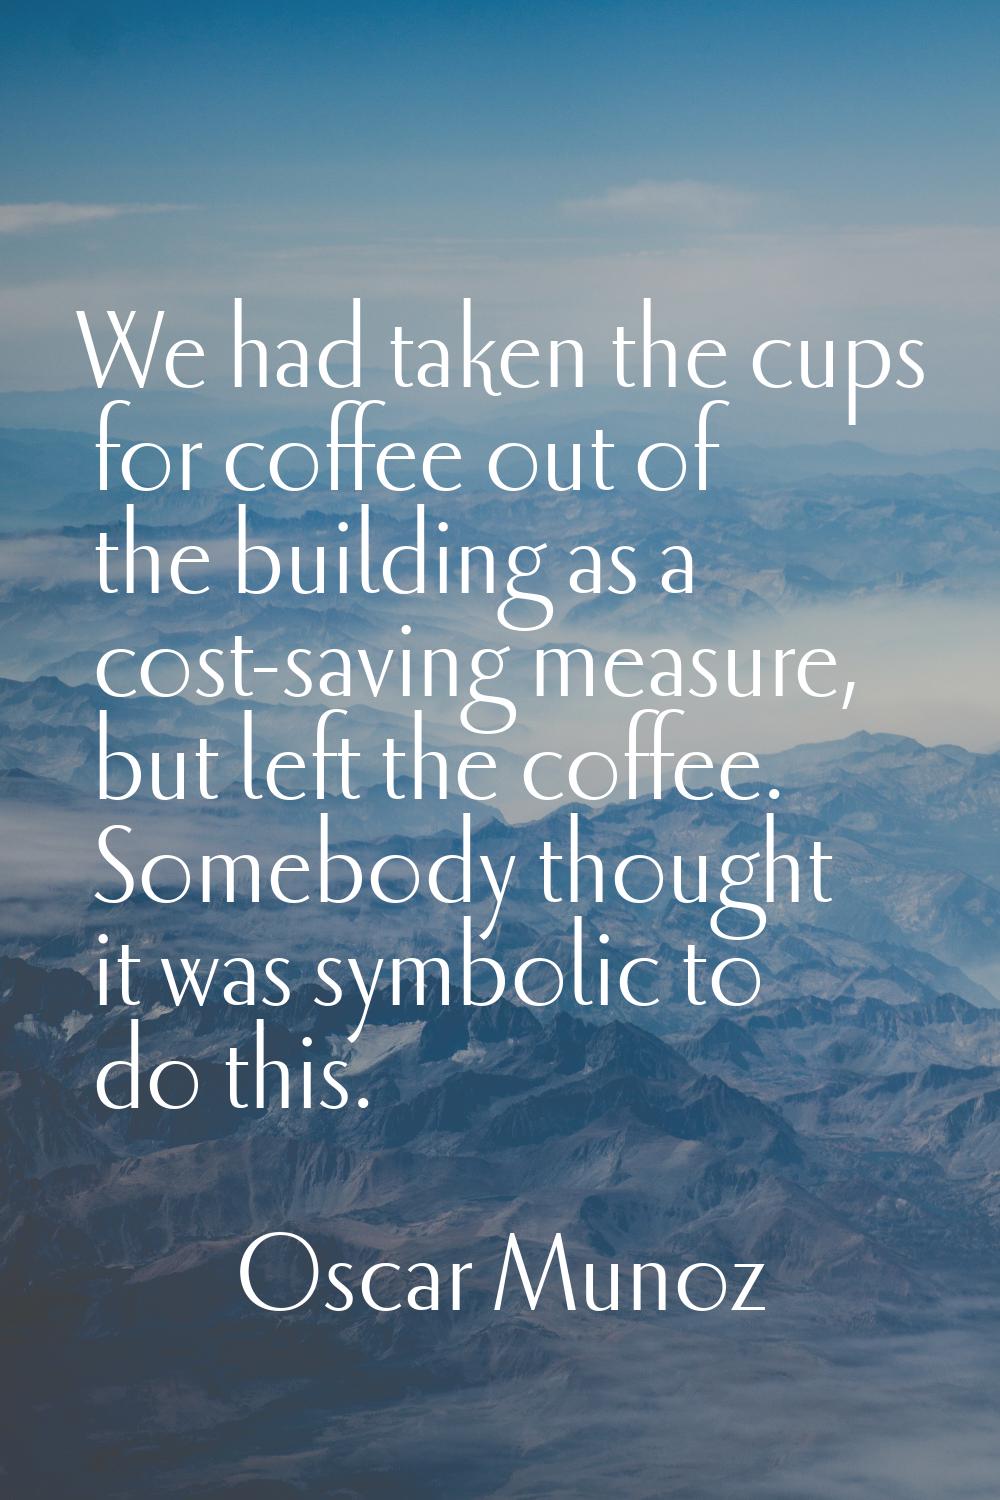 We had taken the cups for coffee out of the building as a cost-saving measure, but left the coffee.